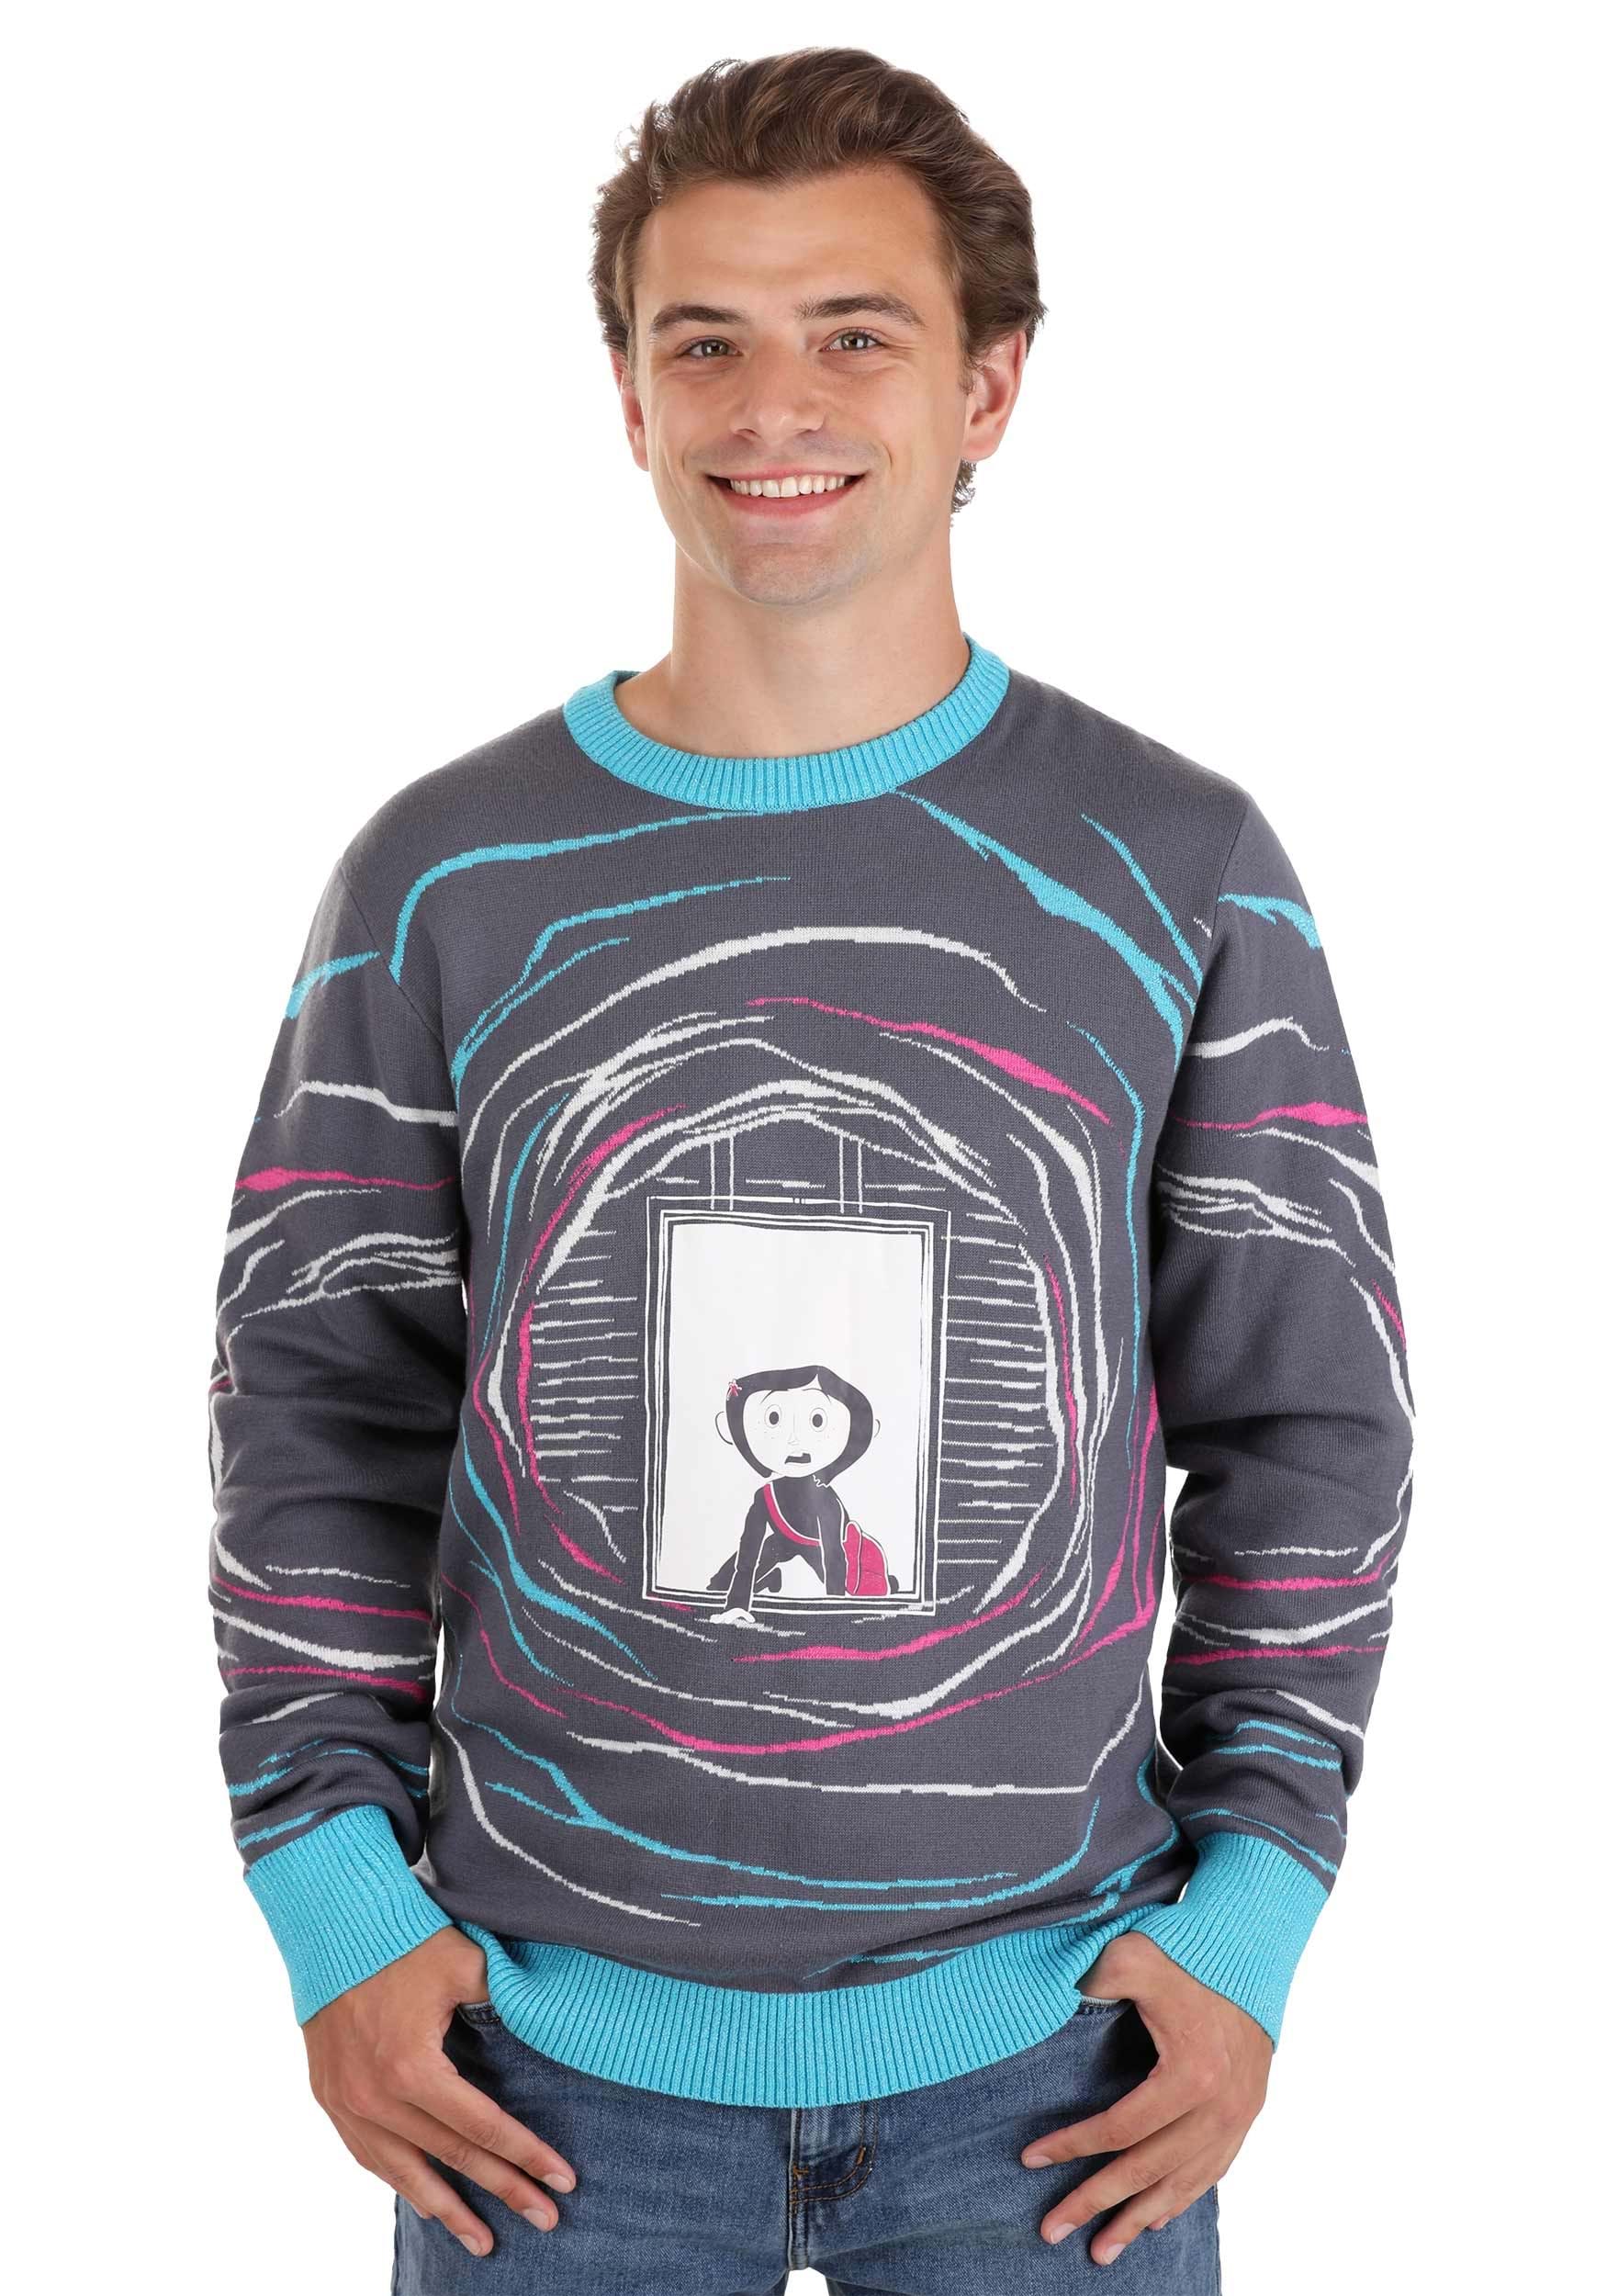 Coraline Ugly Halloween Sweater For Adults